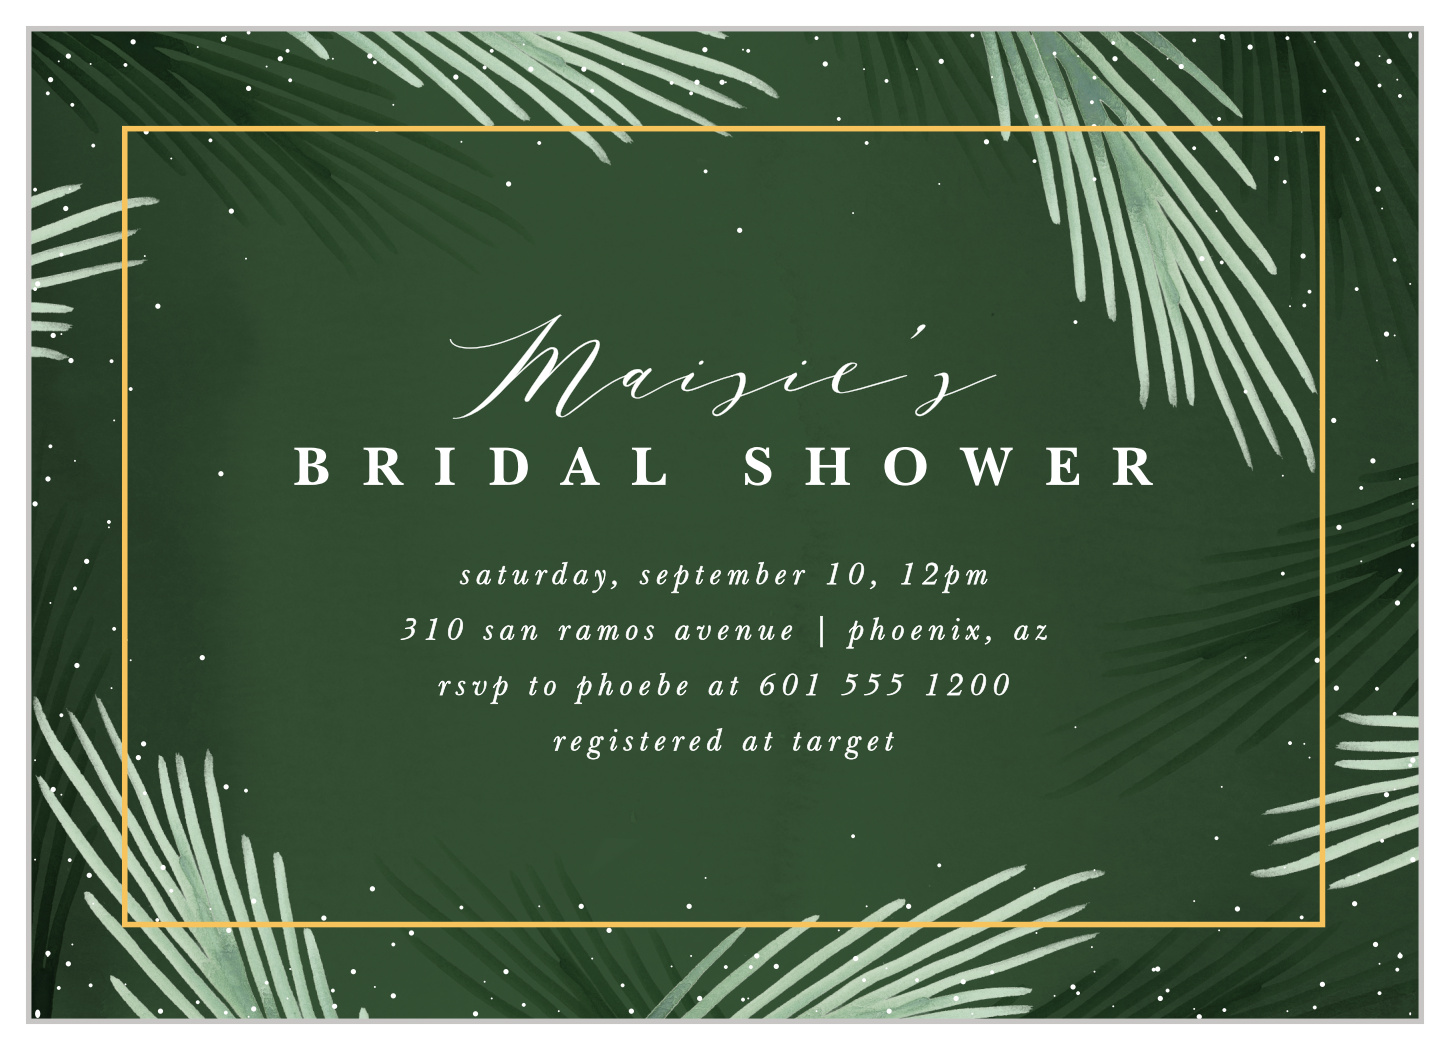 Snowy Forest Bridal Shower Invitations